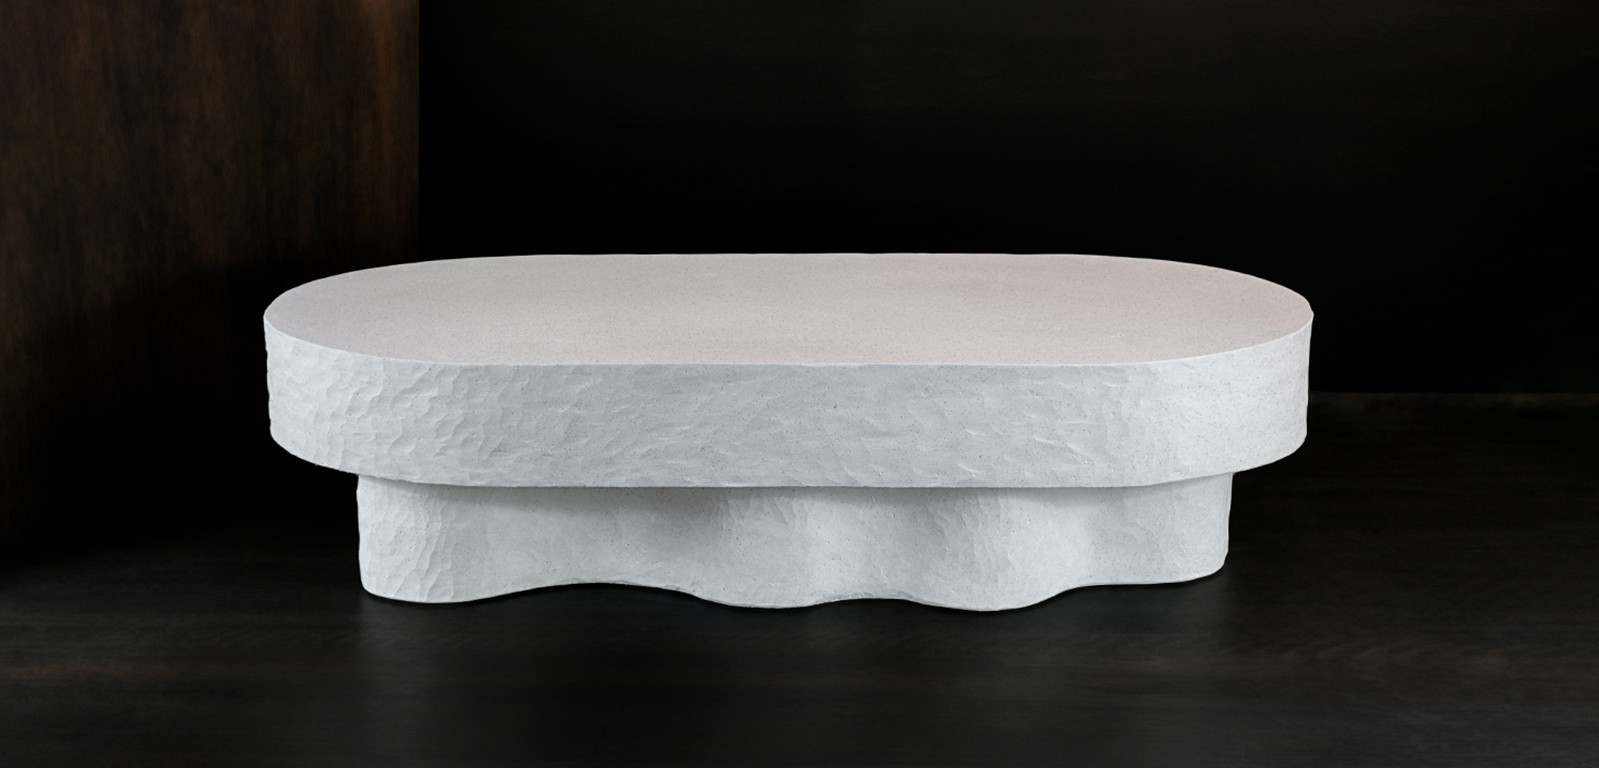 MEDUSA bench/table in white cast stone designed and handcrafted by Alentes Atelier.